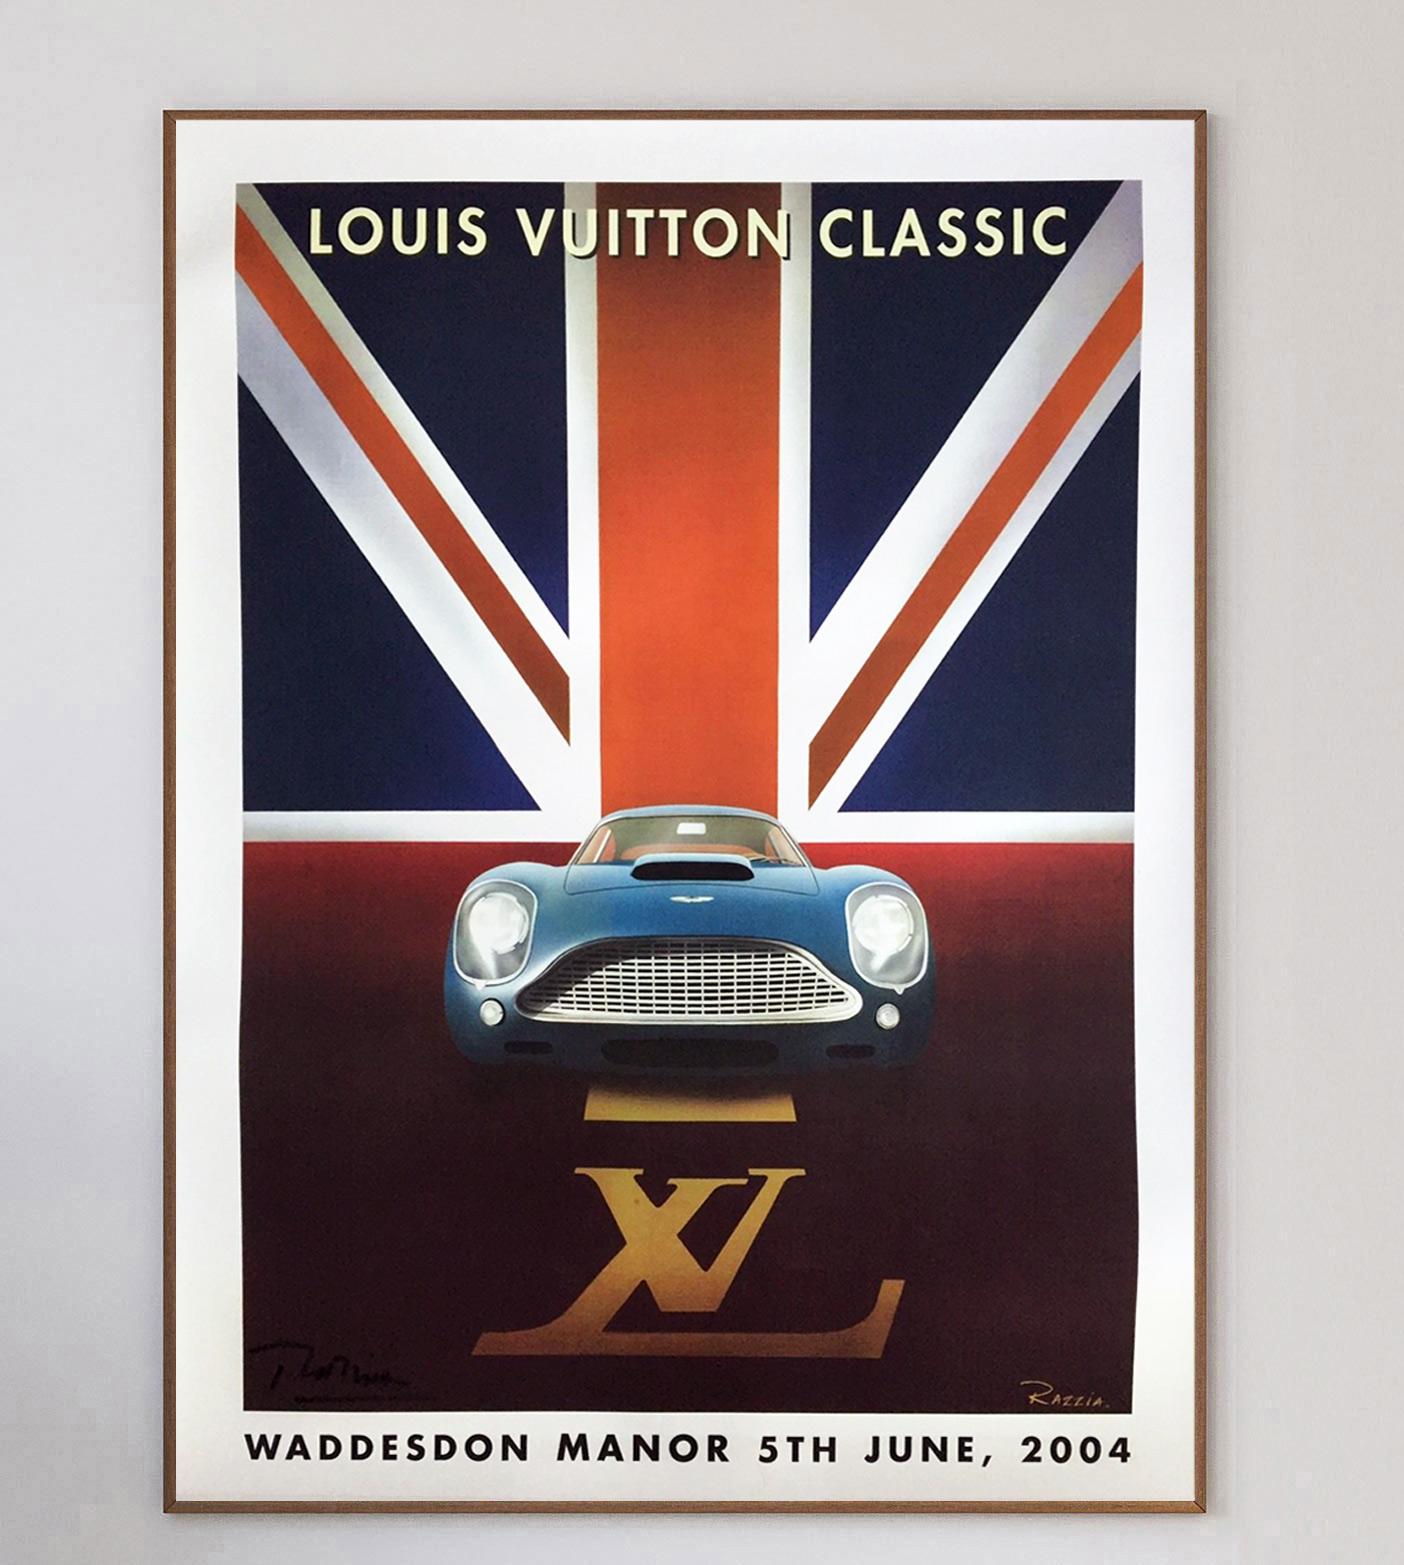 Held at Waddesdon Manor in Oxford in June 2004, the Louis Vuitton Classic was a classic cat event held by the luxury French brand. Featuring a gorgeous Aston Martin in front of a Union Jack, the art deco design is British all-over.

Beautifully